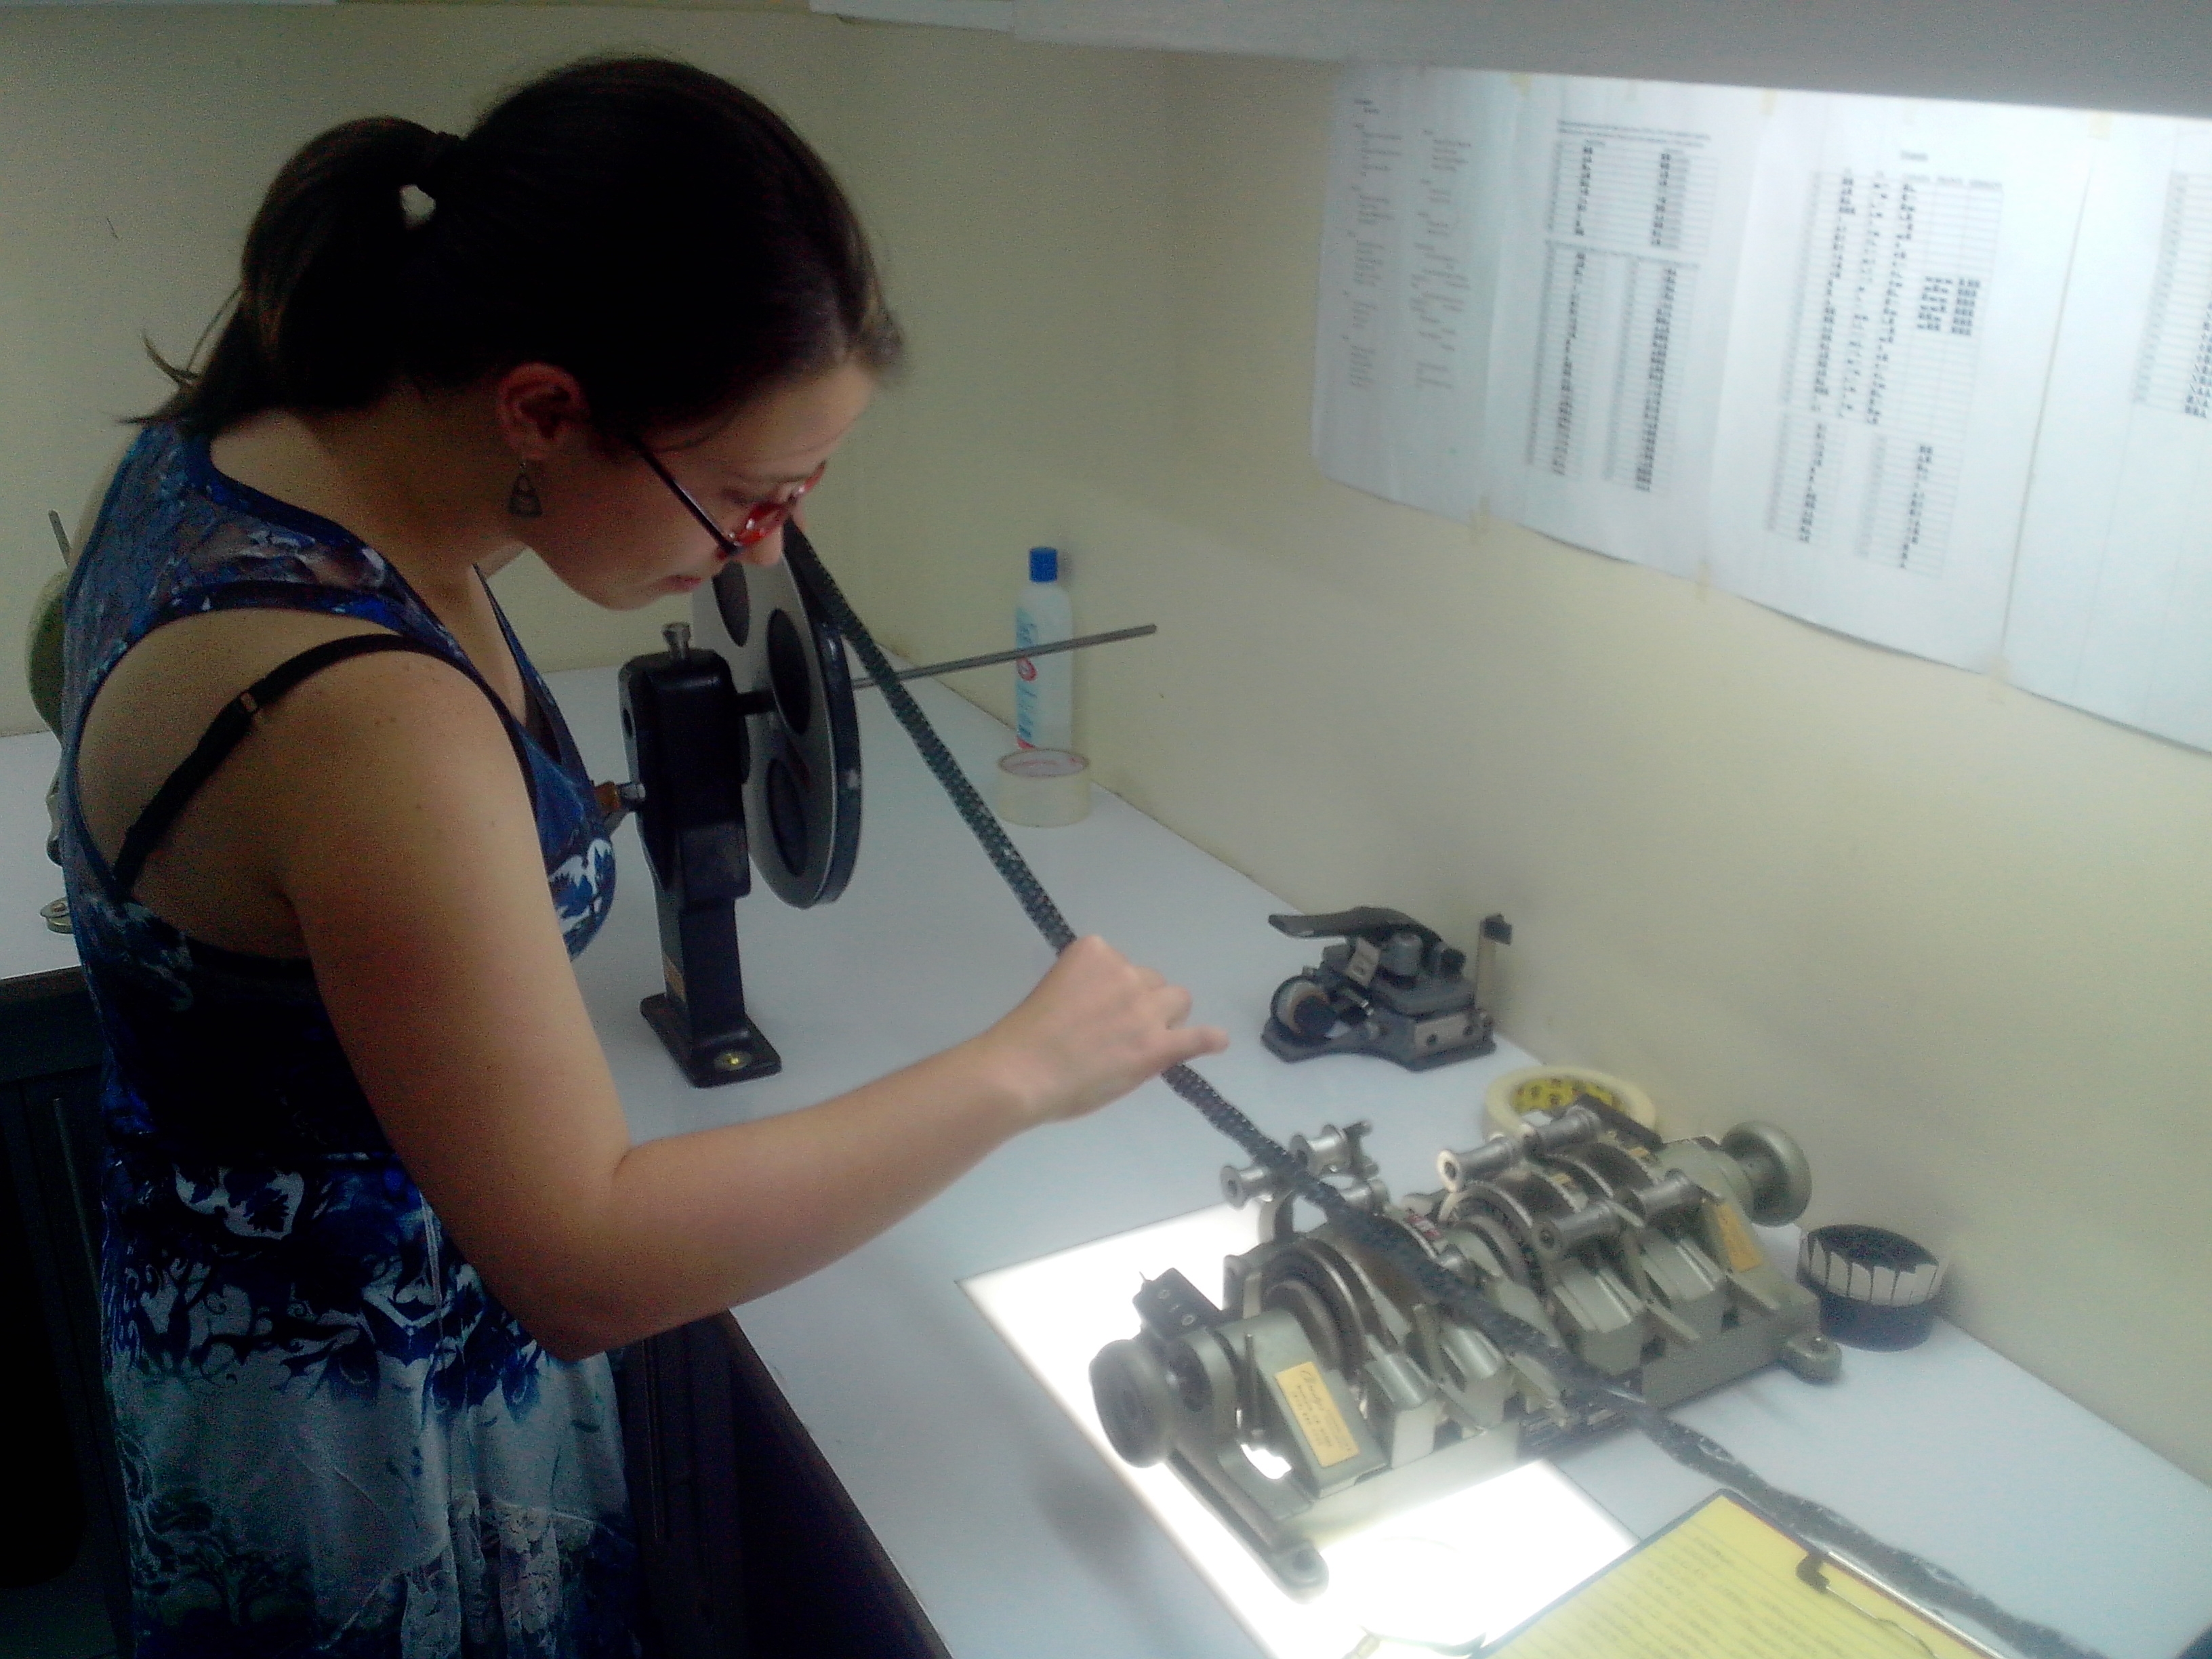 HFPA-funded intern Pamela Vízner Oyarce at the National Film Archives of the Philippines in summer 2013